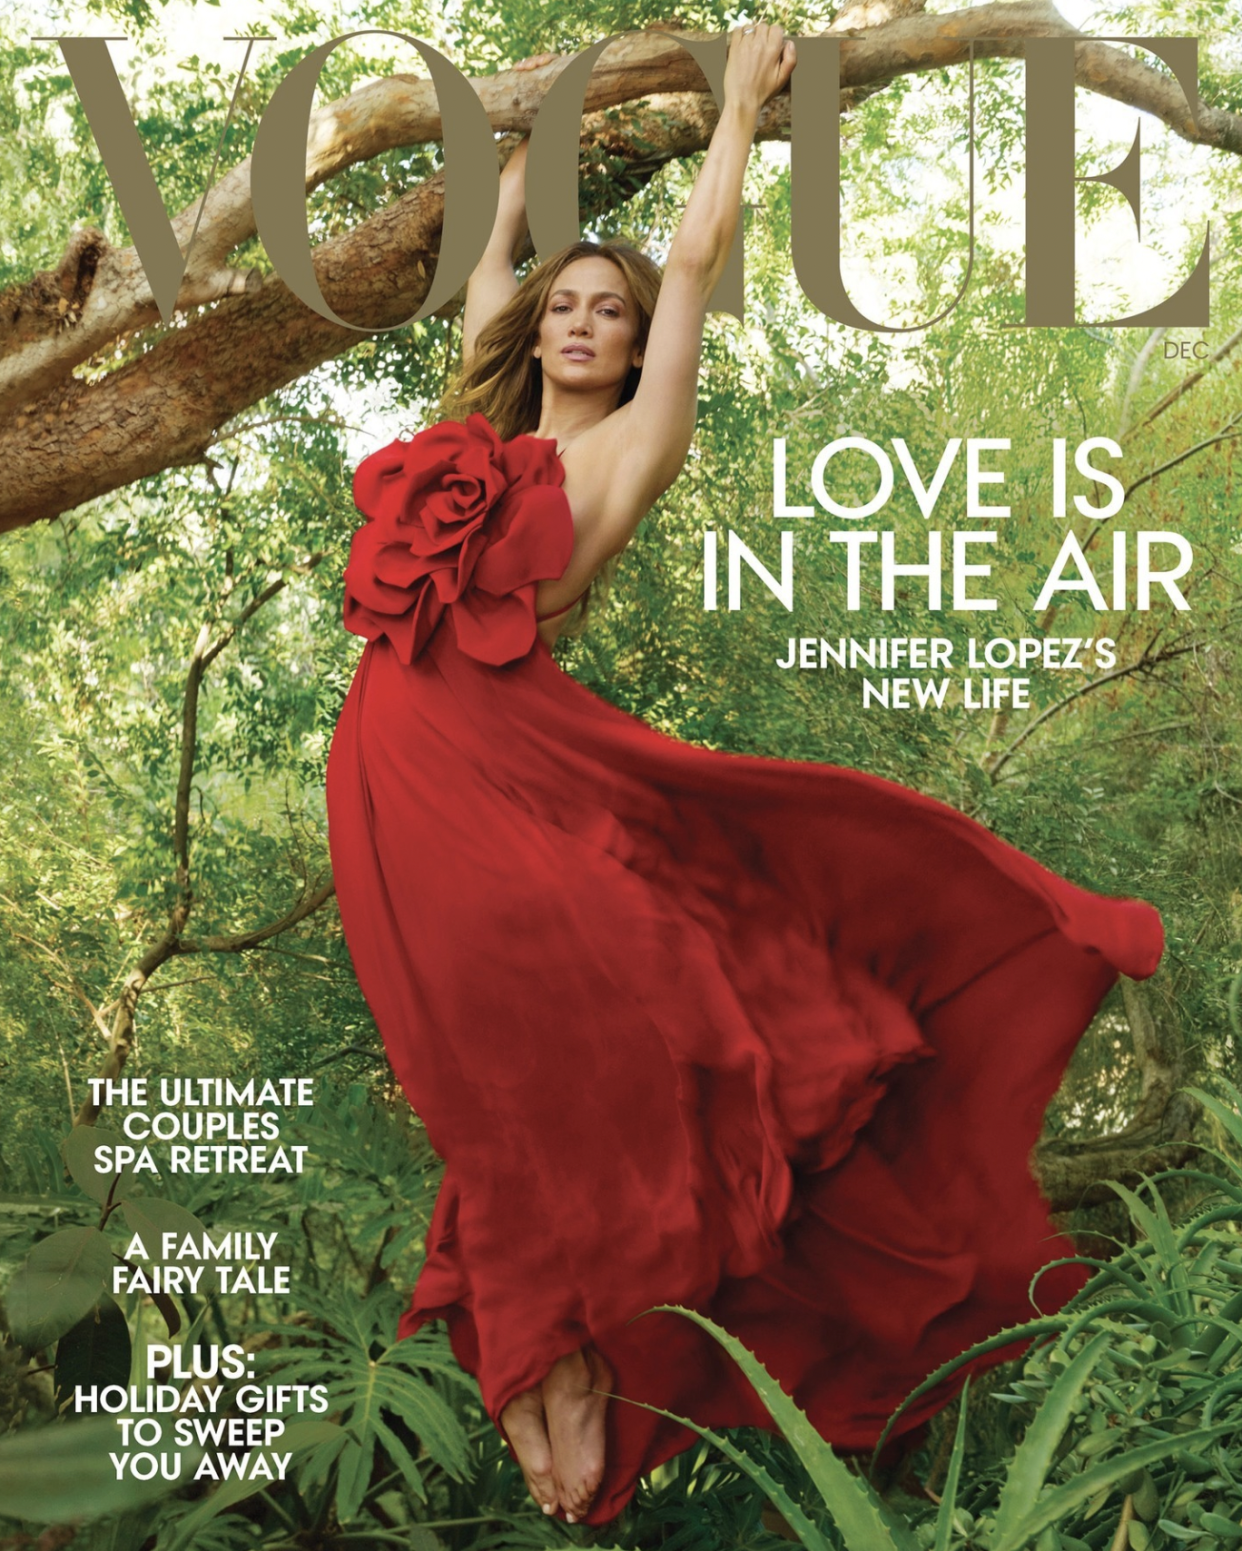 Jennifer Lopez talks marriage to Ben Affleck and more in the new Vogue cover story. (Photo: ANNIE LEIBOVITZ/Vogue)